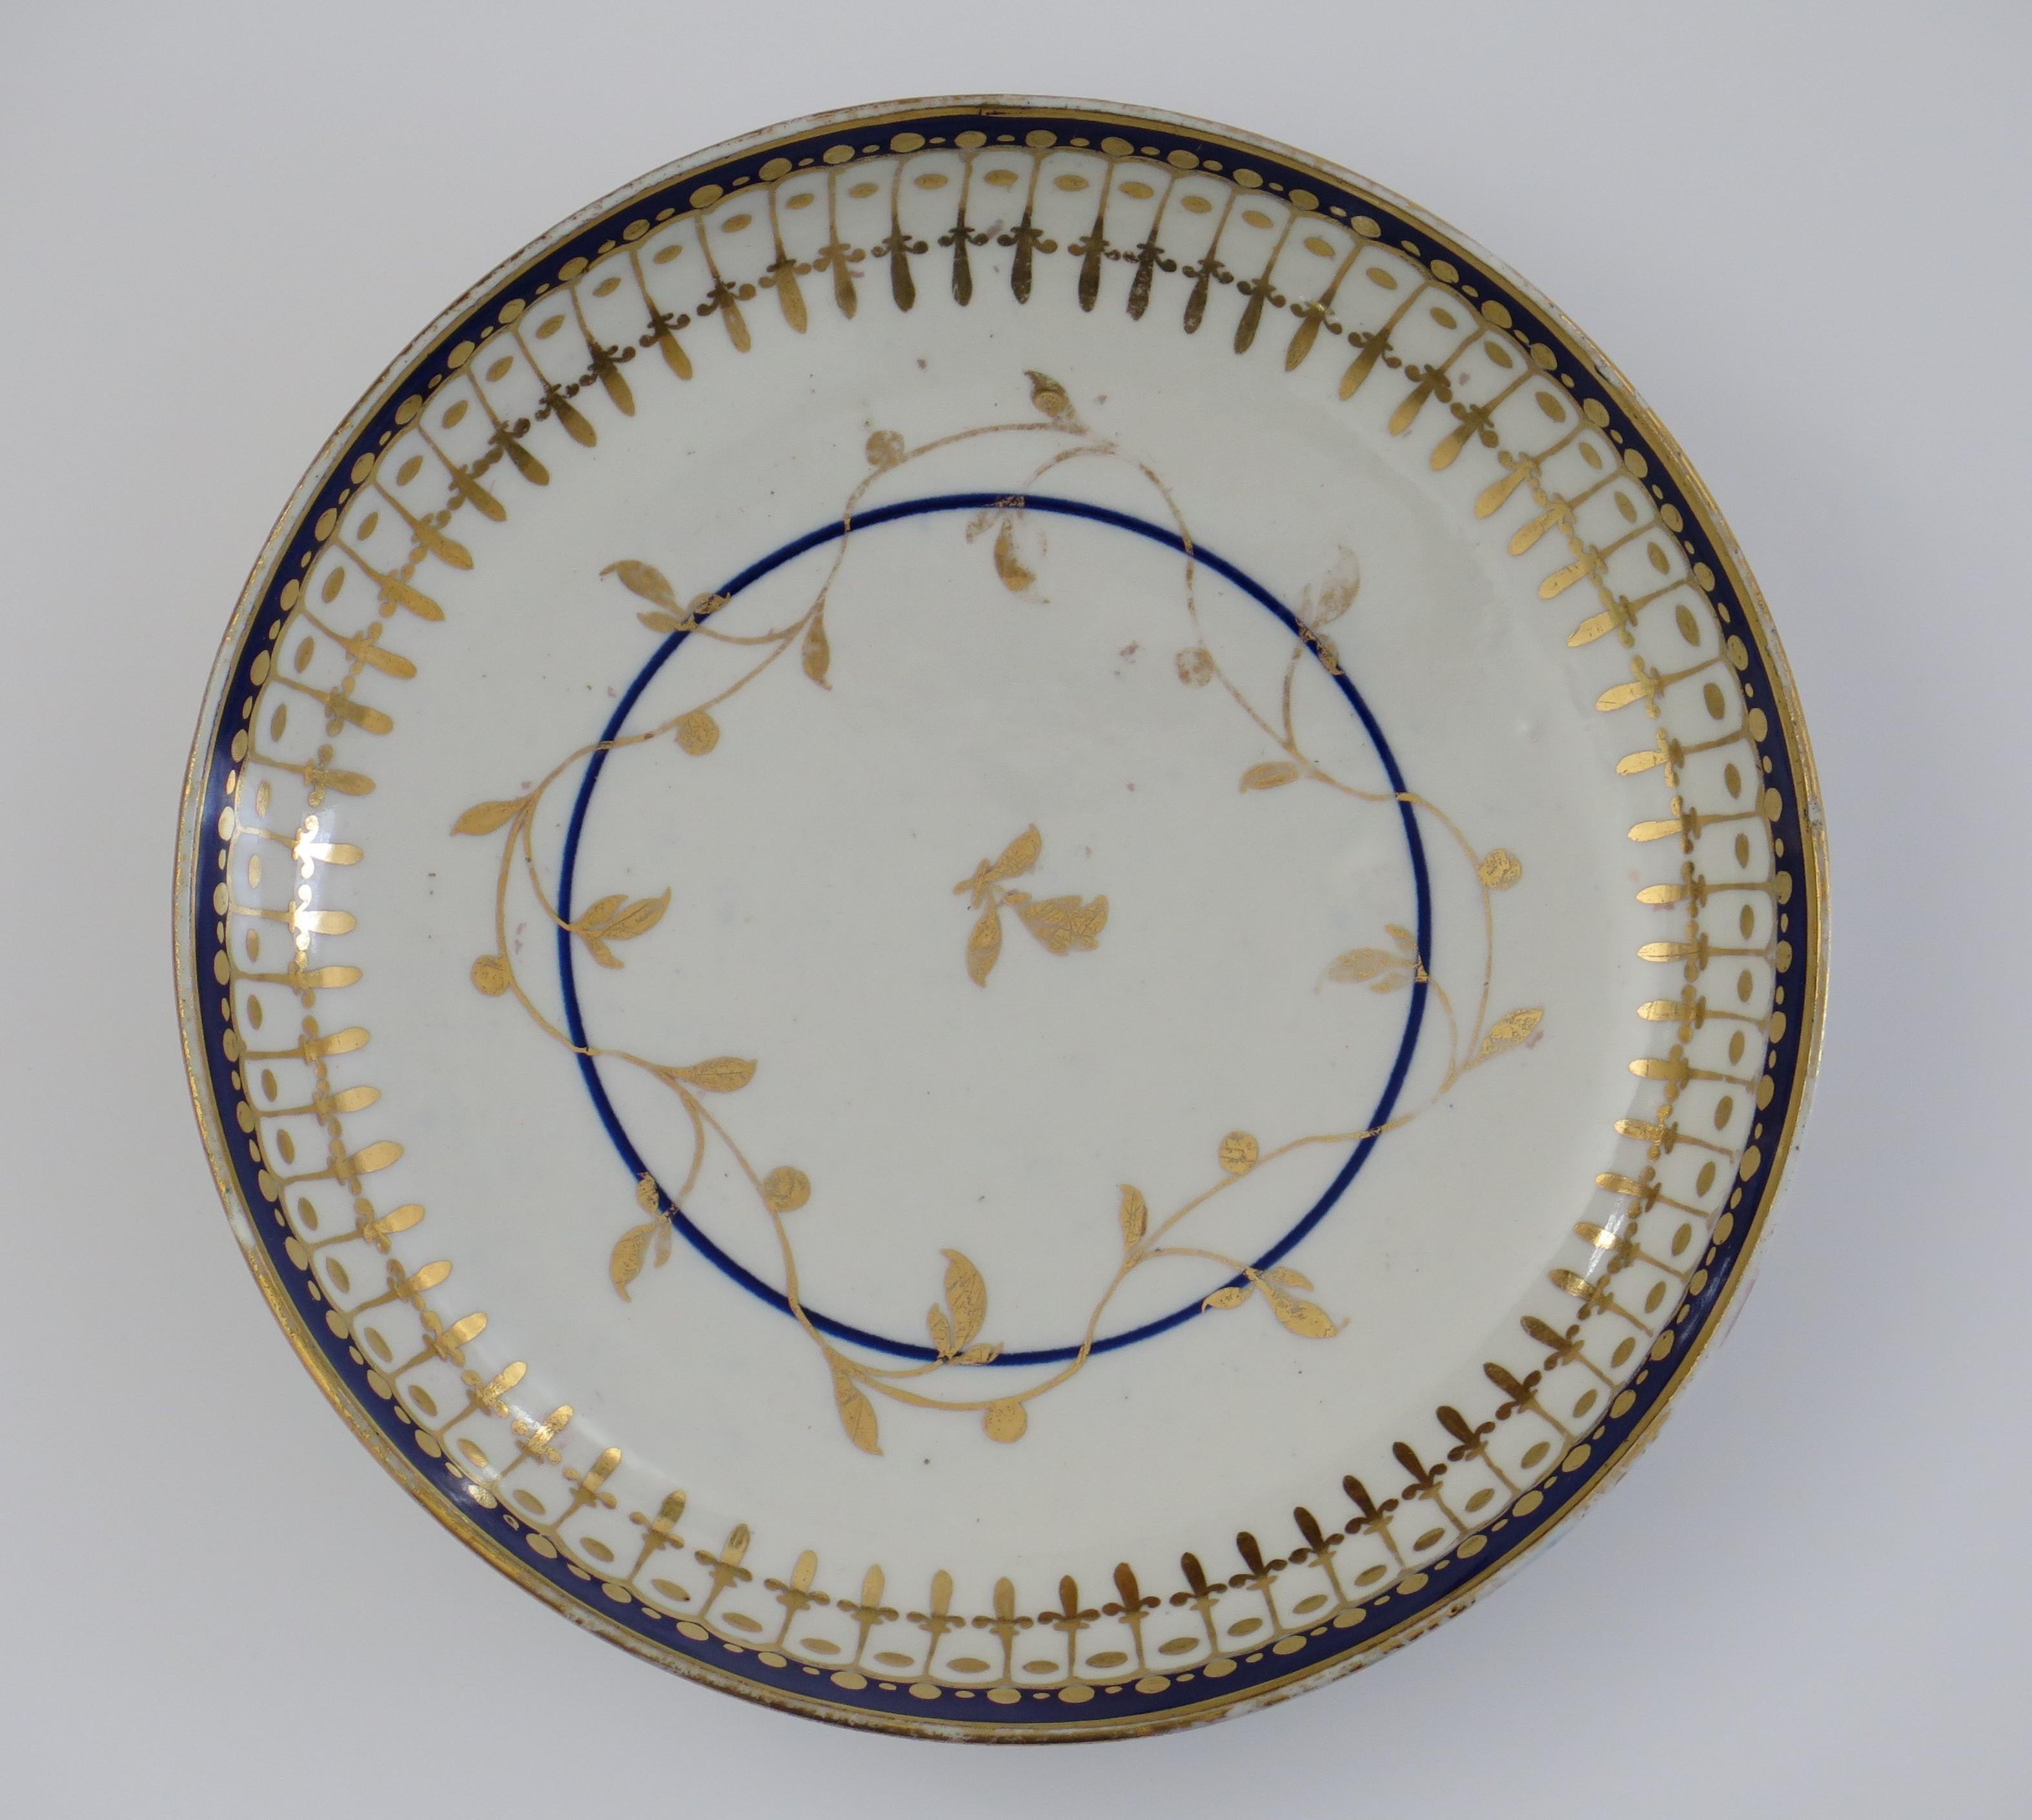 This is a good late 18th century Worcester porcelain Slop bowl or Saucer Dish with a combined blue and gold pattern, fully marked and dating to circa 1780.

The bowl is decorated in a classical pattern of underglaze blue with hand gilded overglaze